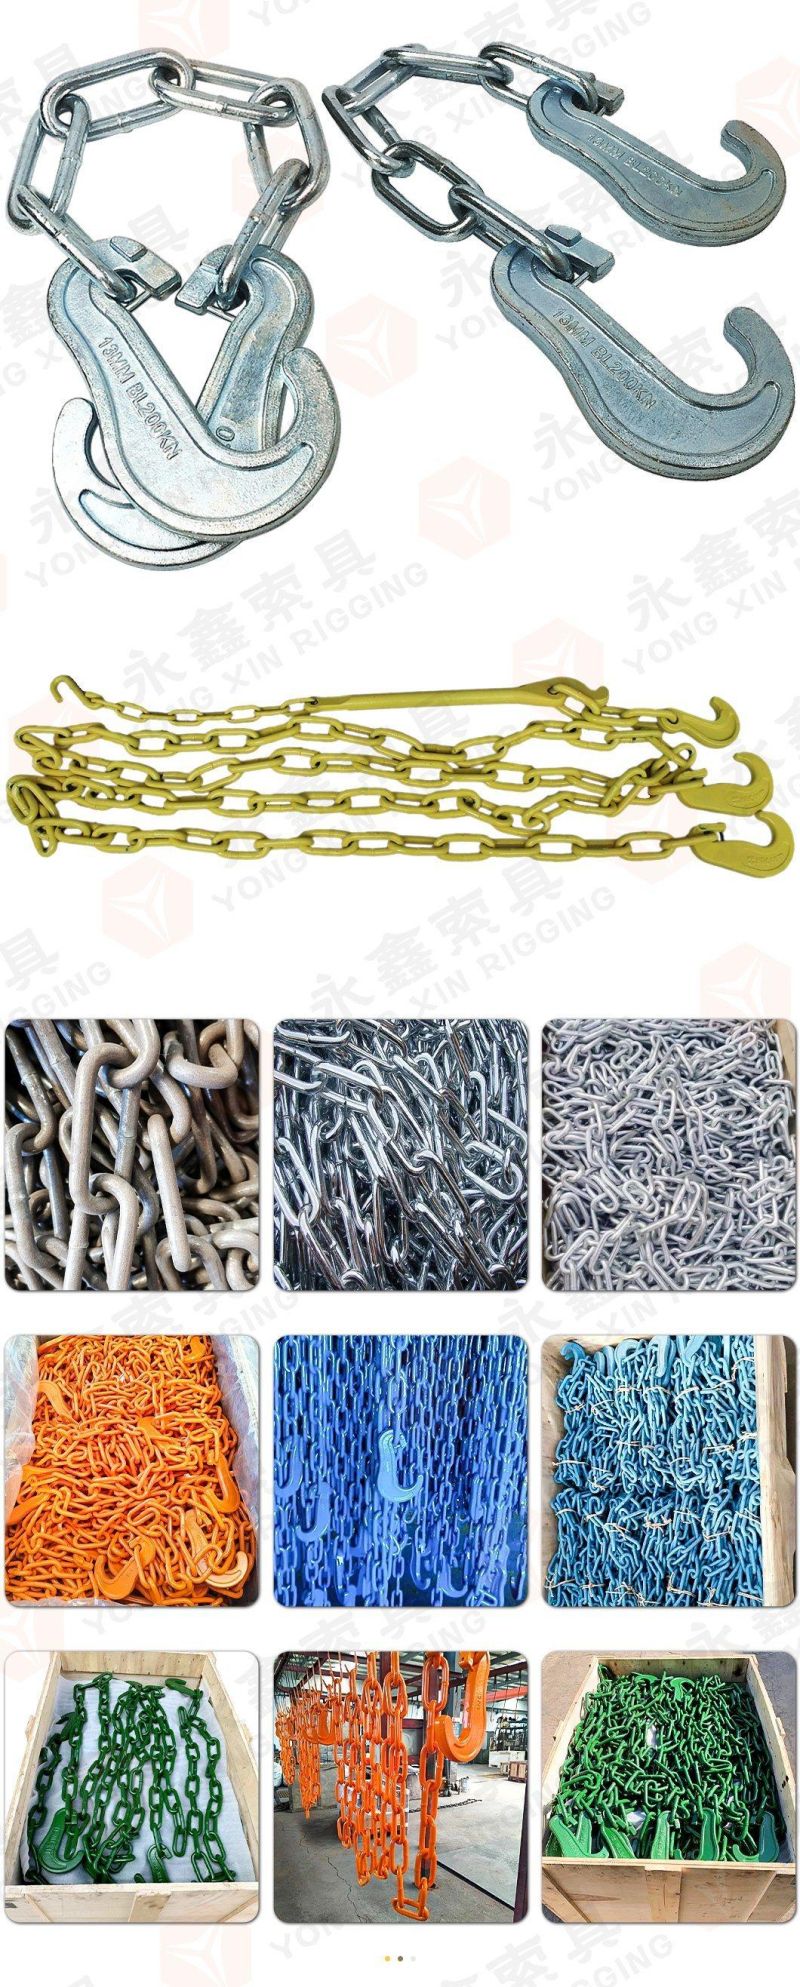 The Lashing Chain for Container Lashing Part